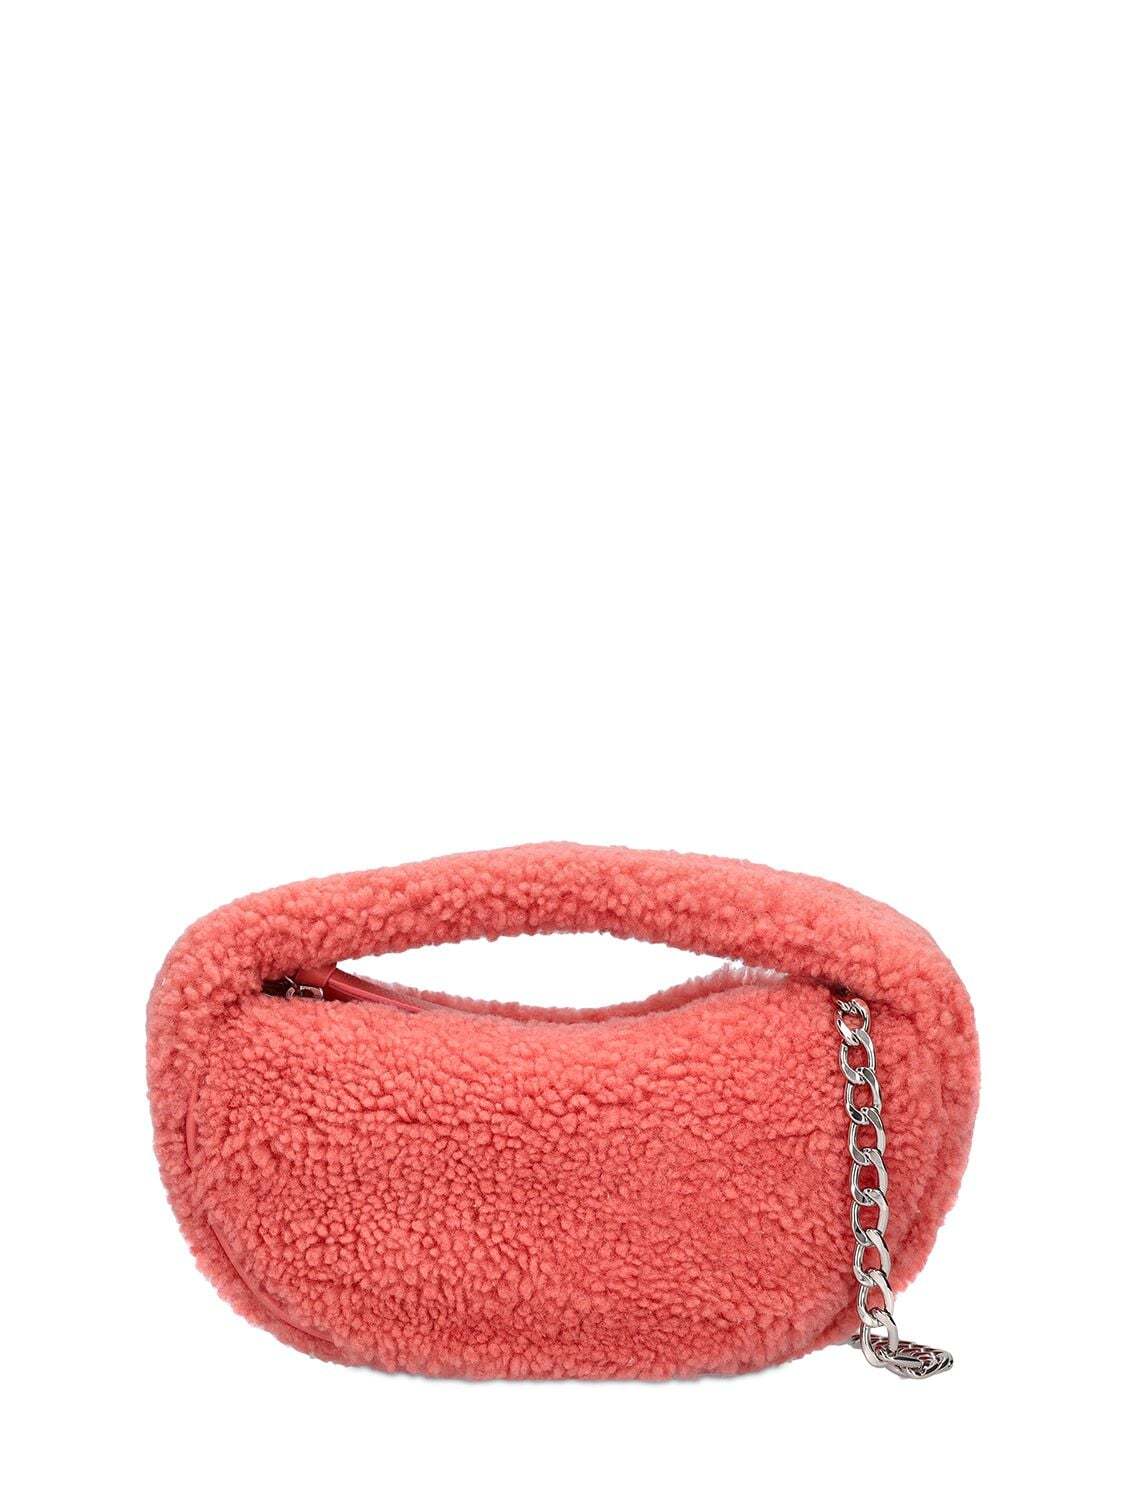 BY FAR Baby Cush Shearling Top Handle Bag in pink